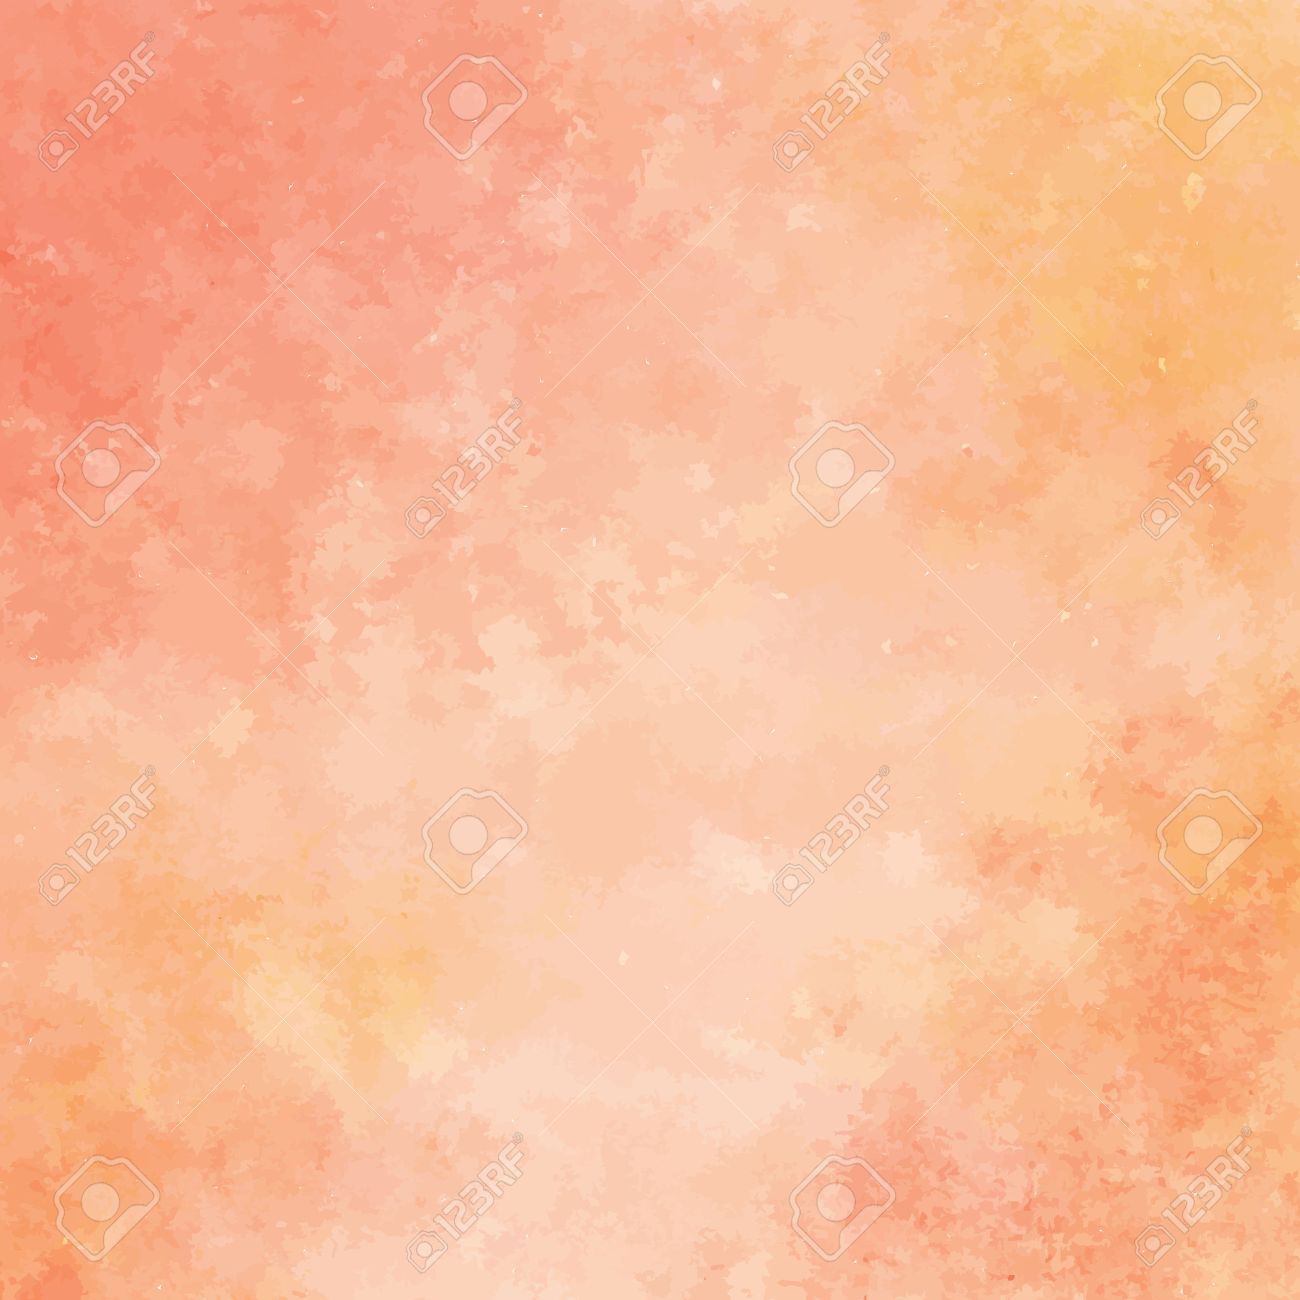 Peach And Orange Watercolor Texture Background Hand Painted